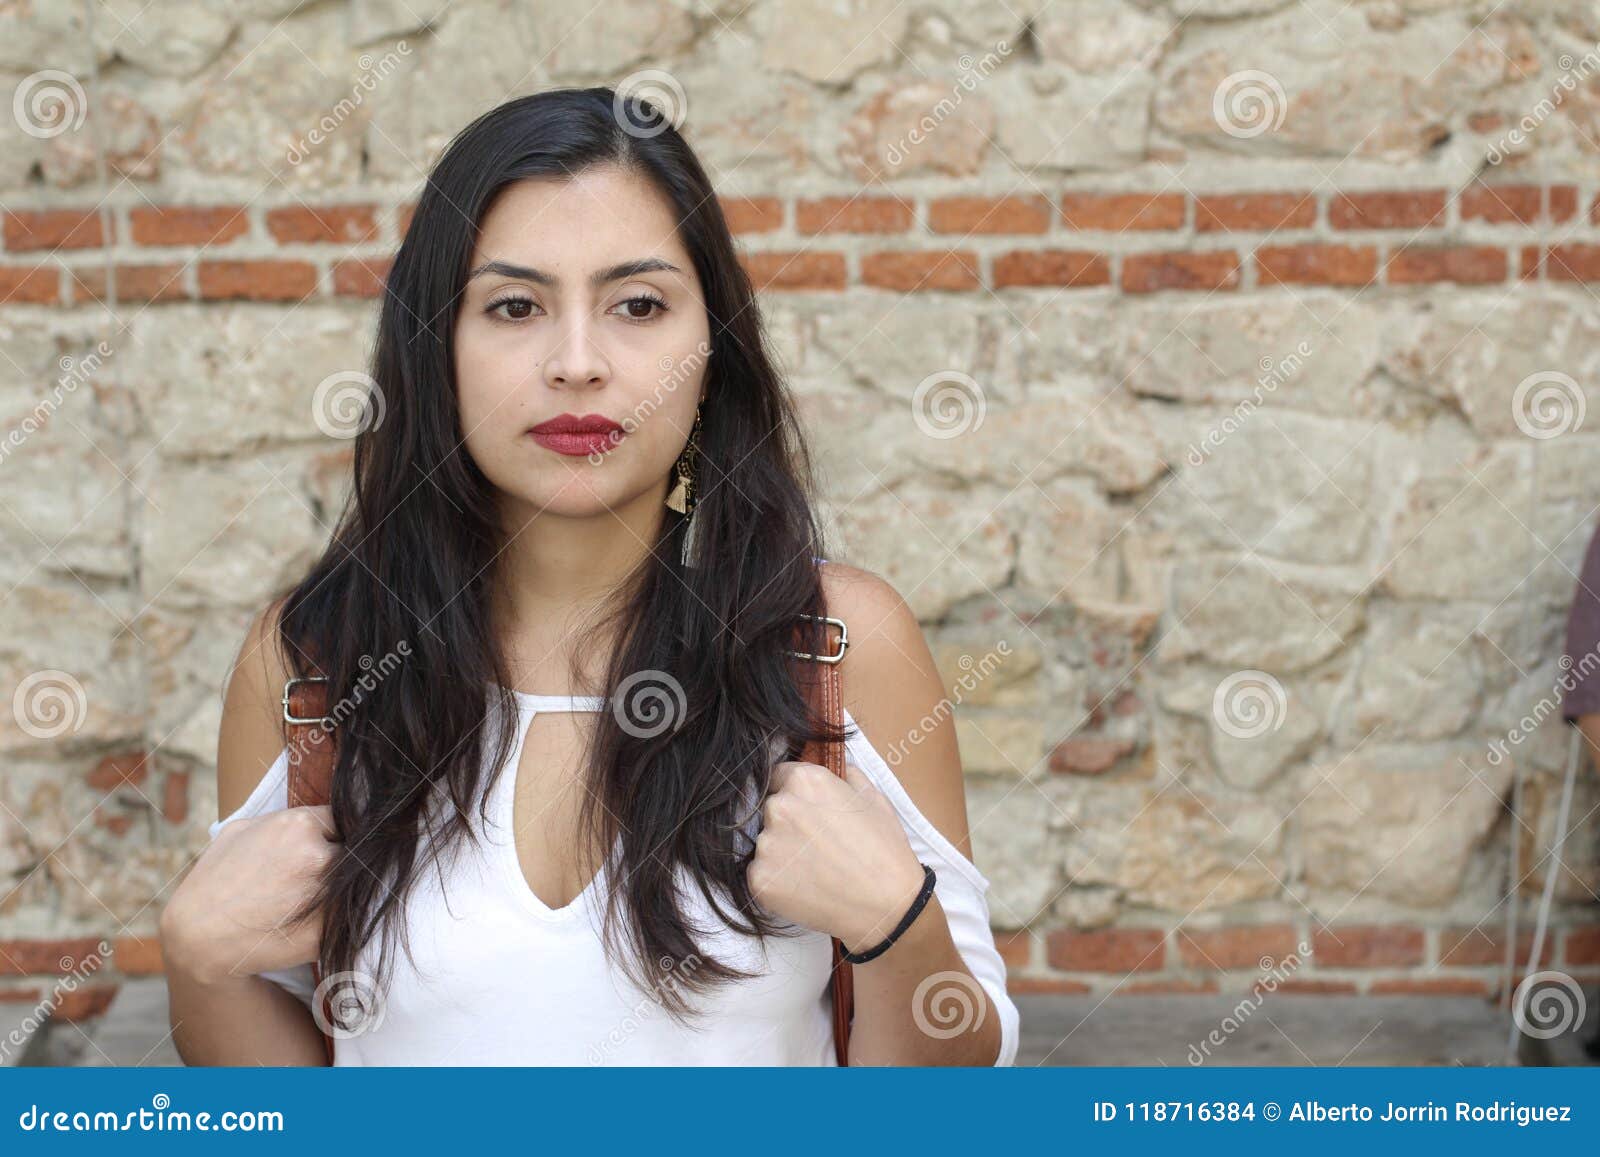 preoccupied ethnic woman with copy space